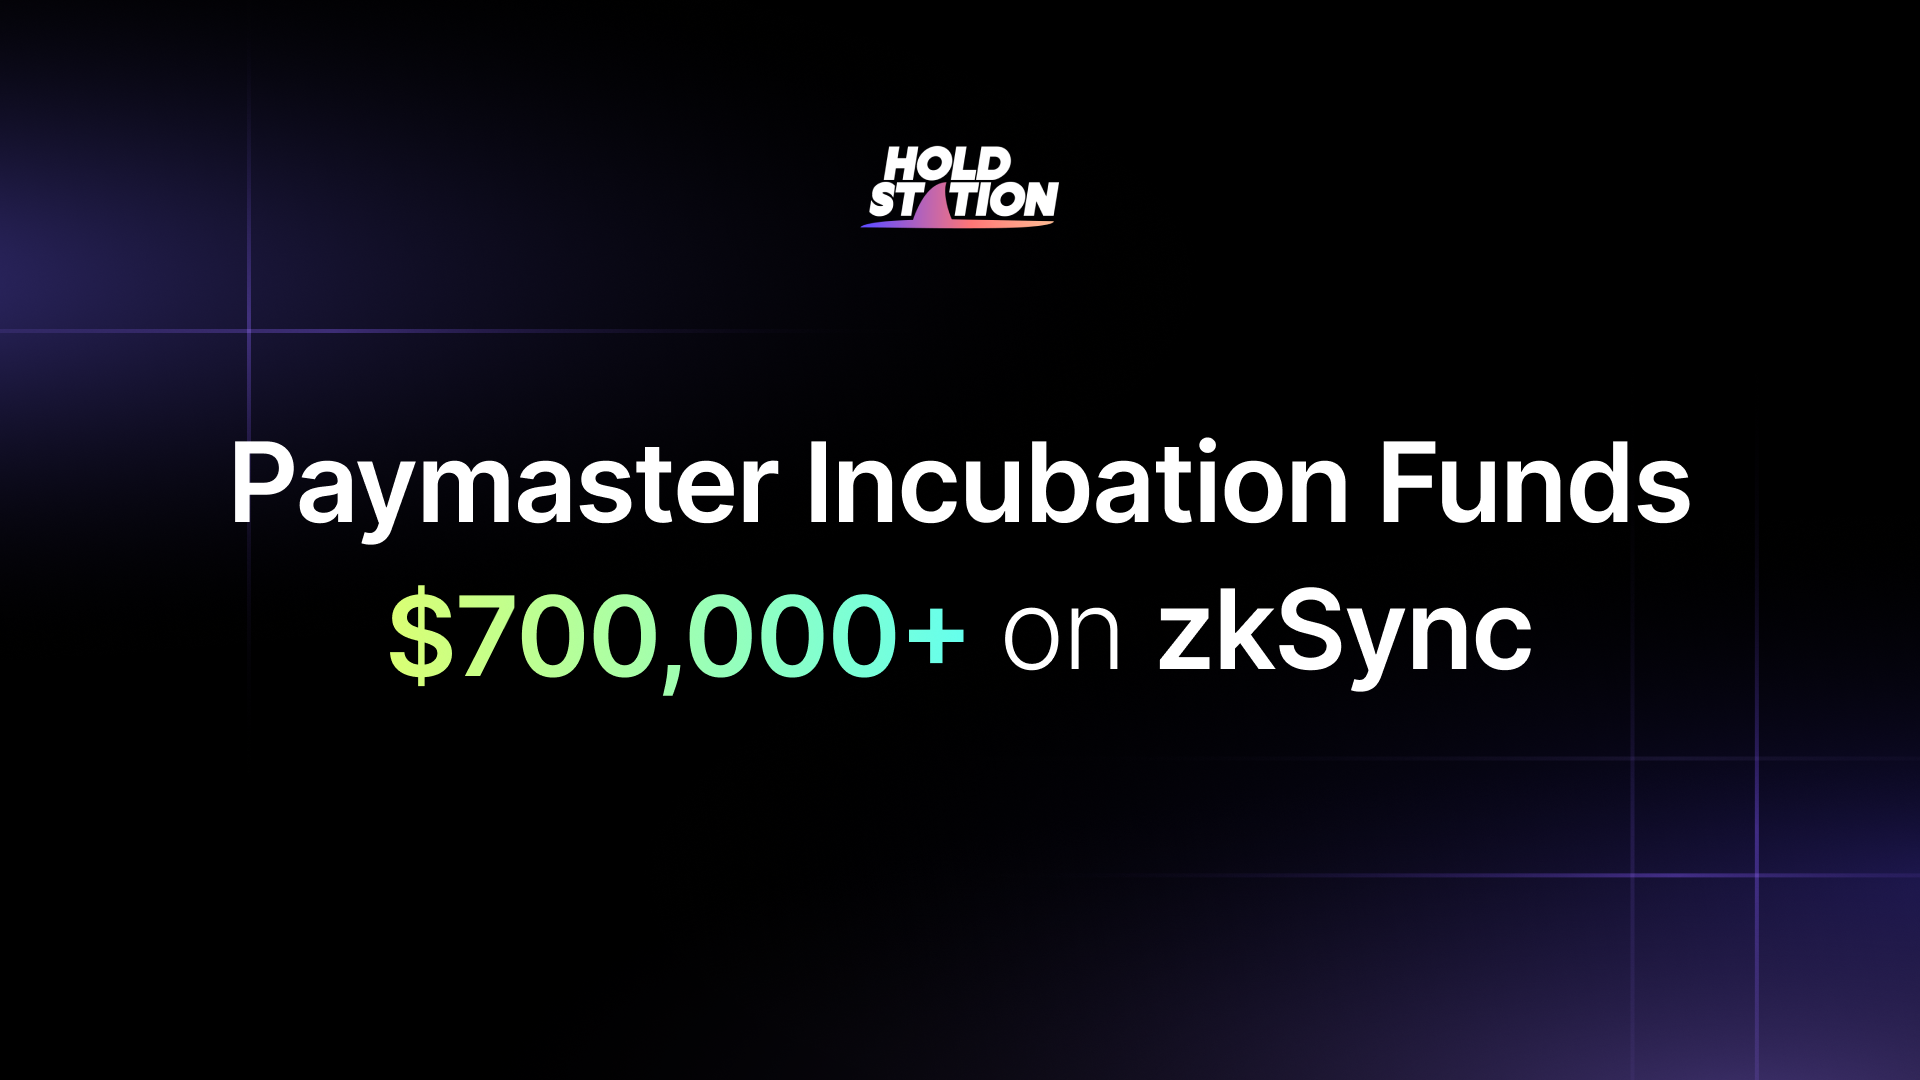 Holdstation Launches $700,000 Paymaster Incubation Fund to Support Launchpad Projects on zkSync